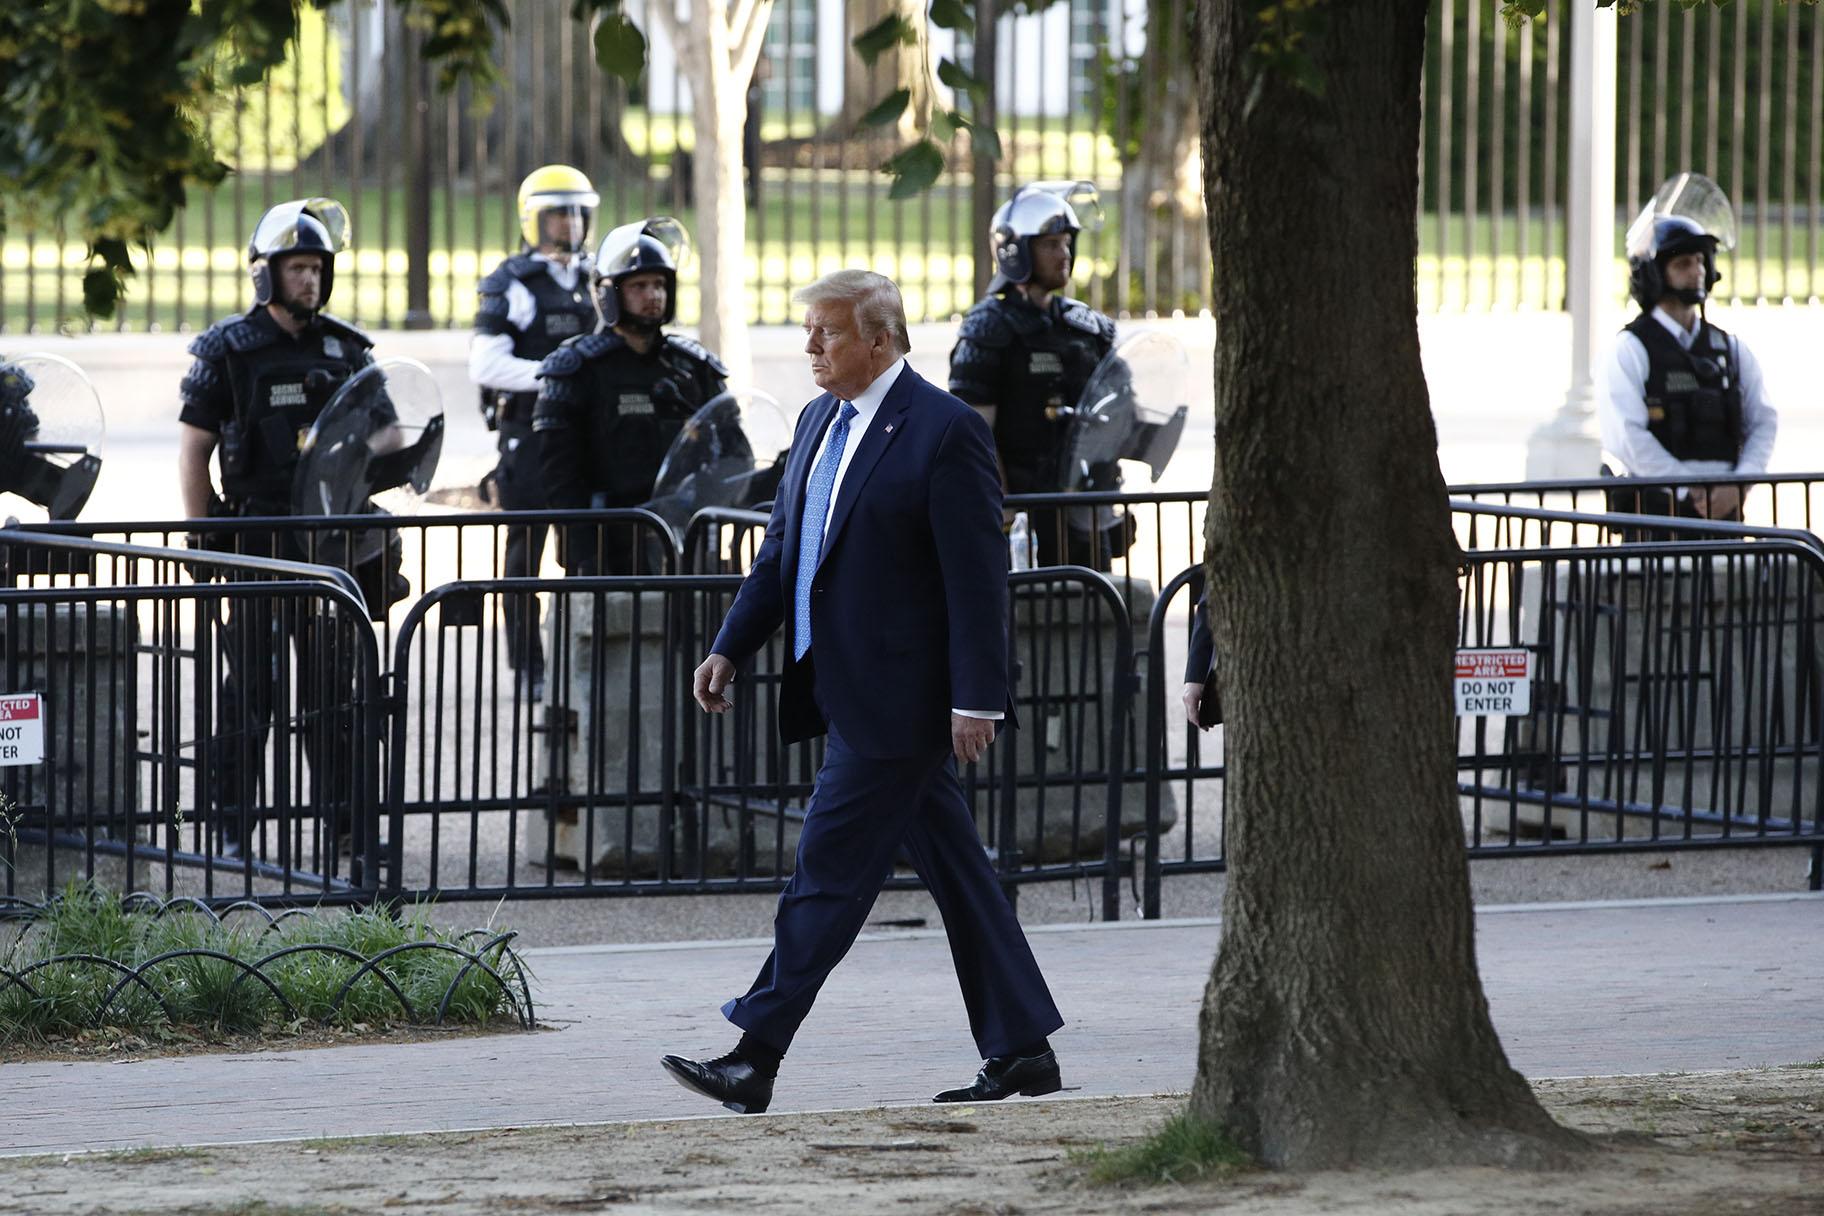 President Donald Trump walks in Lafayette Park to visit outside St. John’s Church across from the White House Monday, June 1, 2020, in Washington. Part of the church was set on fire during protests on Sunday night. (AP Photo / Patrick Semansky)